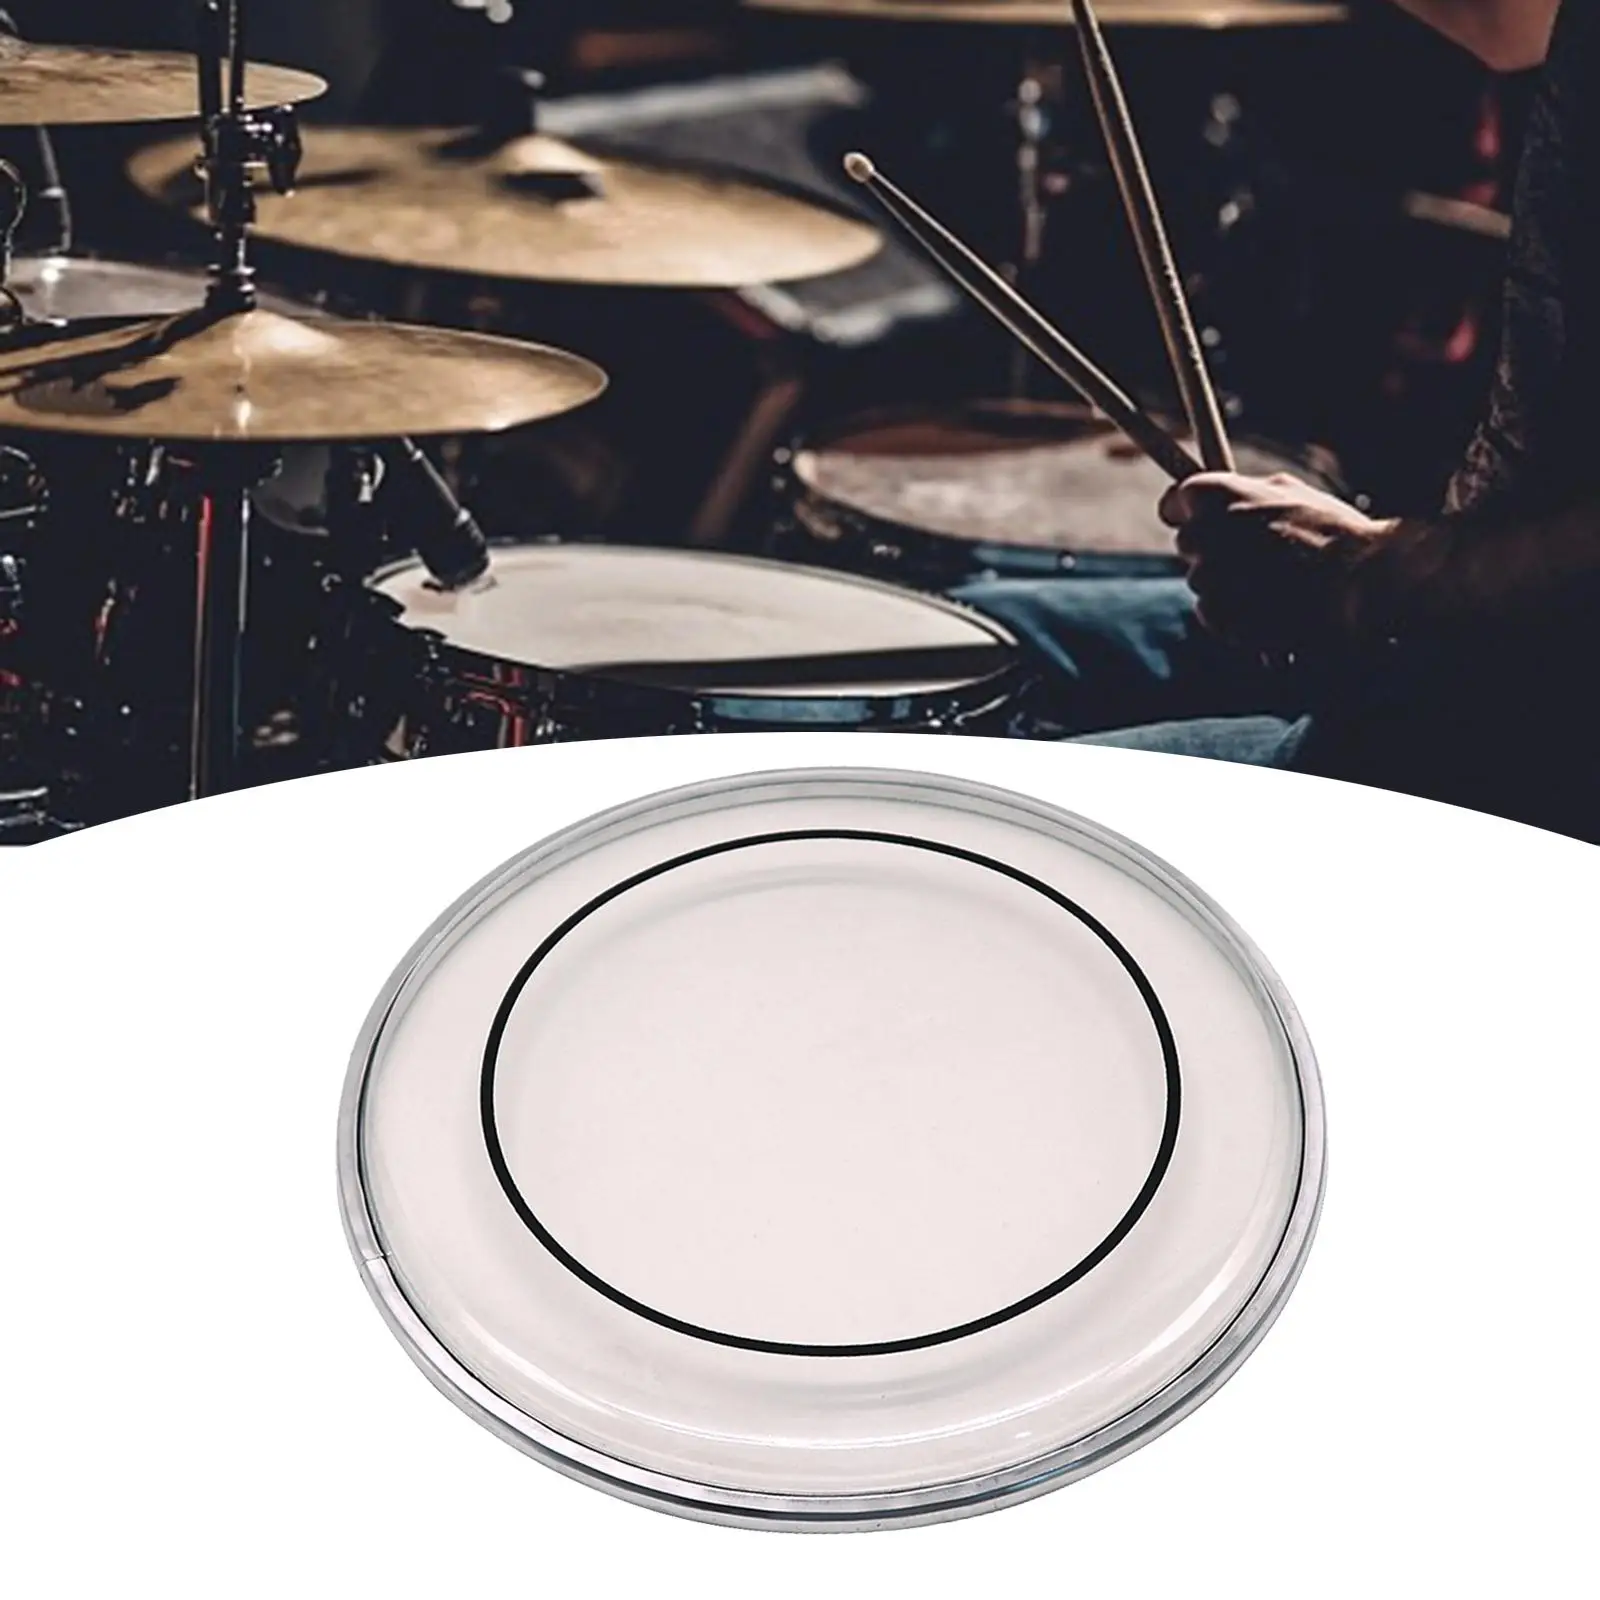 Drum Head Practical Replacement Snare Drum Head for Beginners Drummer Adults